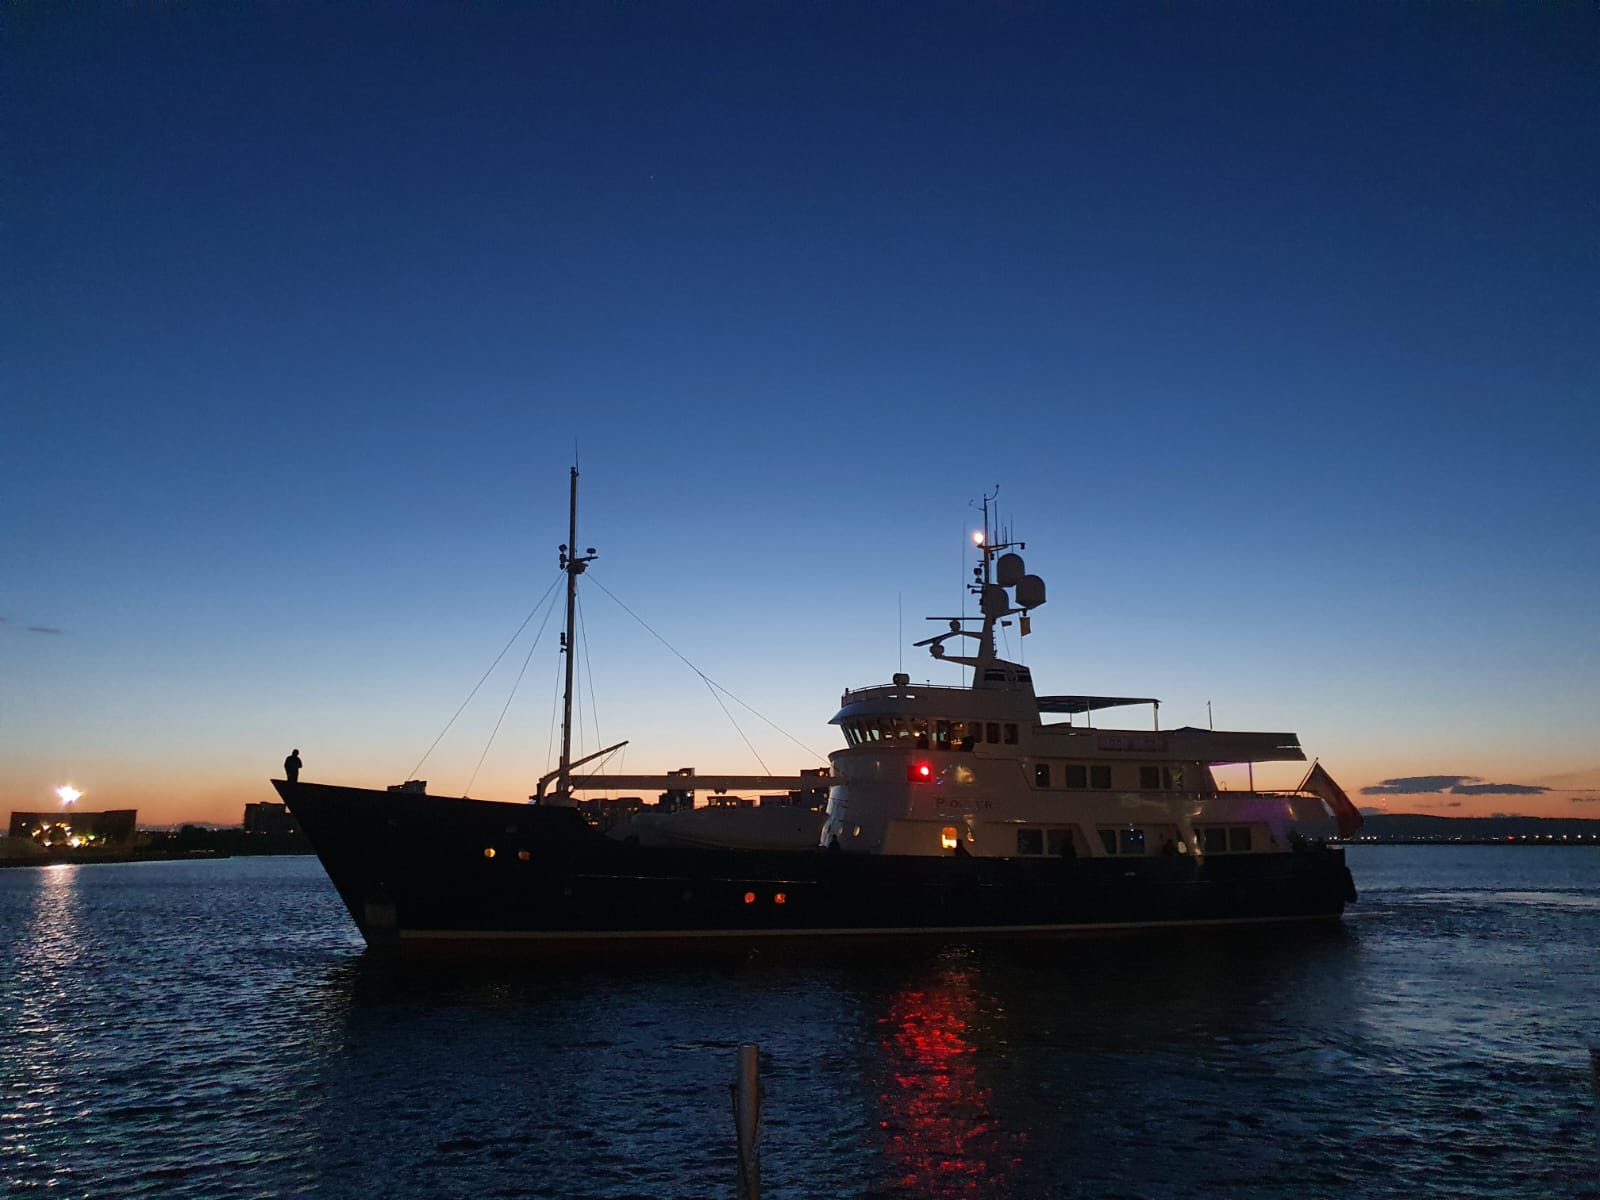 M/Y Pioneer yacht spotted at sunset in the UK